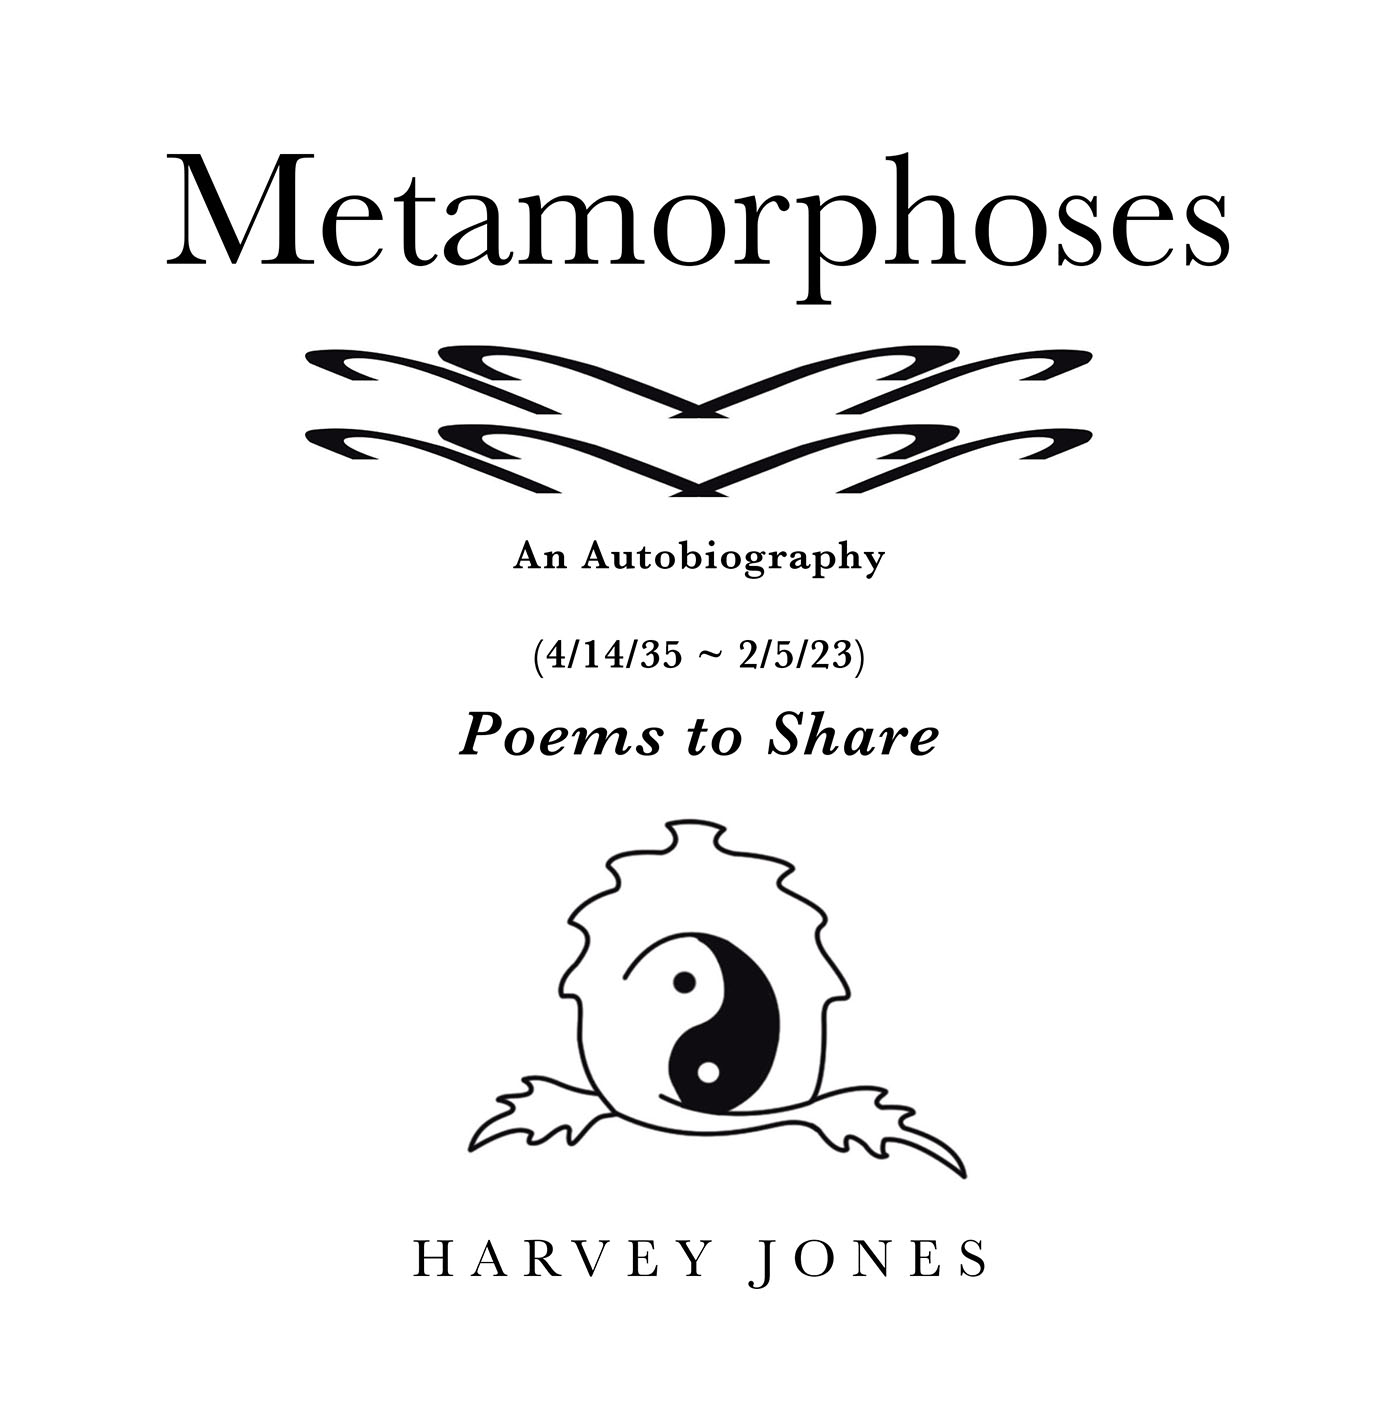 Author Harvey Jones’s New Book, "Metamorphoses: Poems to Share," is a Series of Poems That Chronicles the Changes the Author Has Embraced Over the Course of His Life